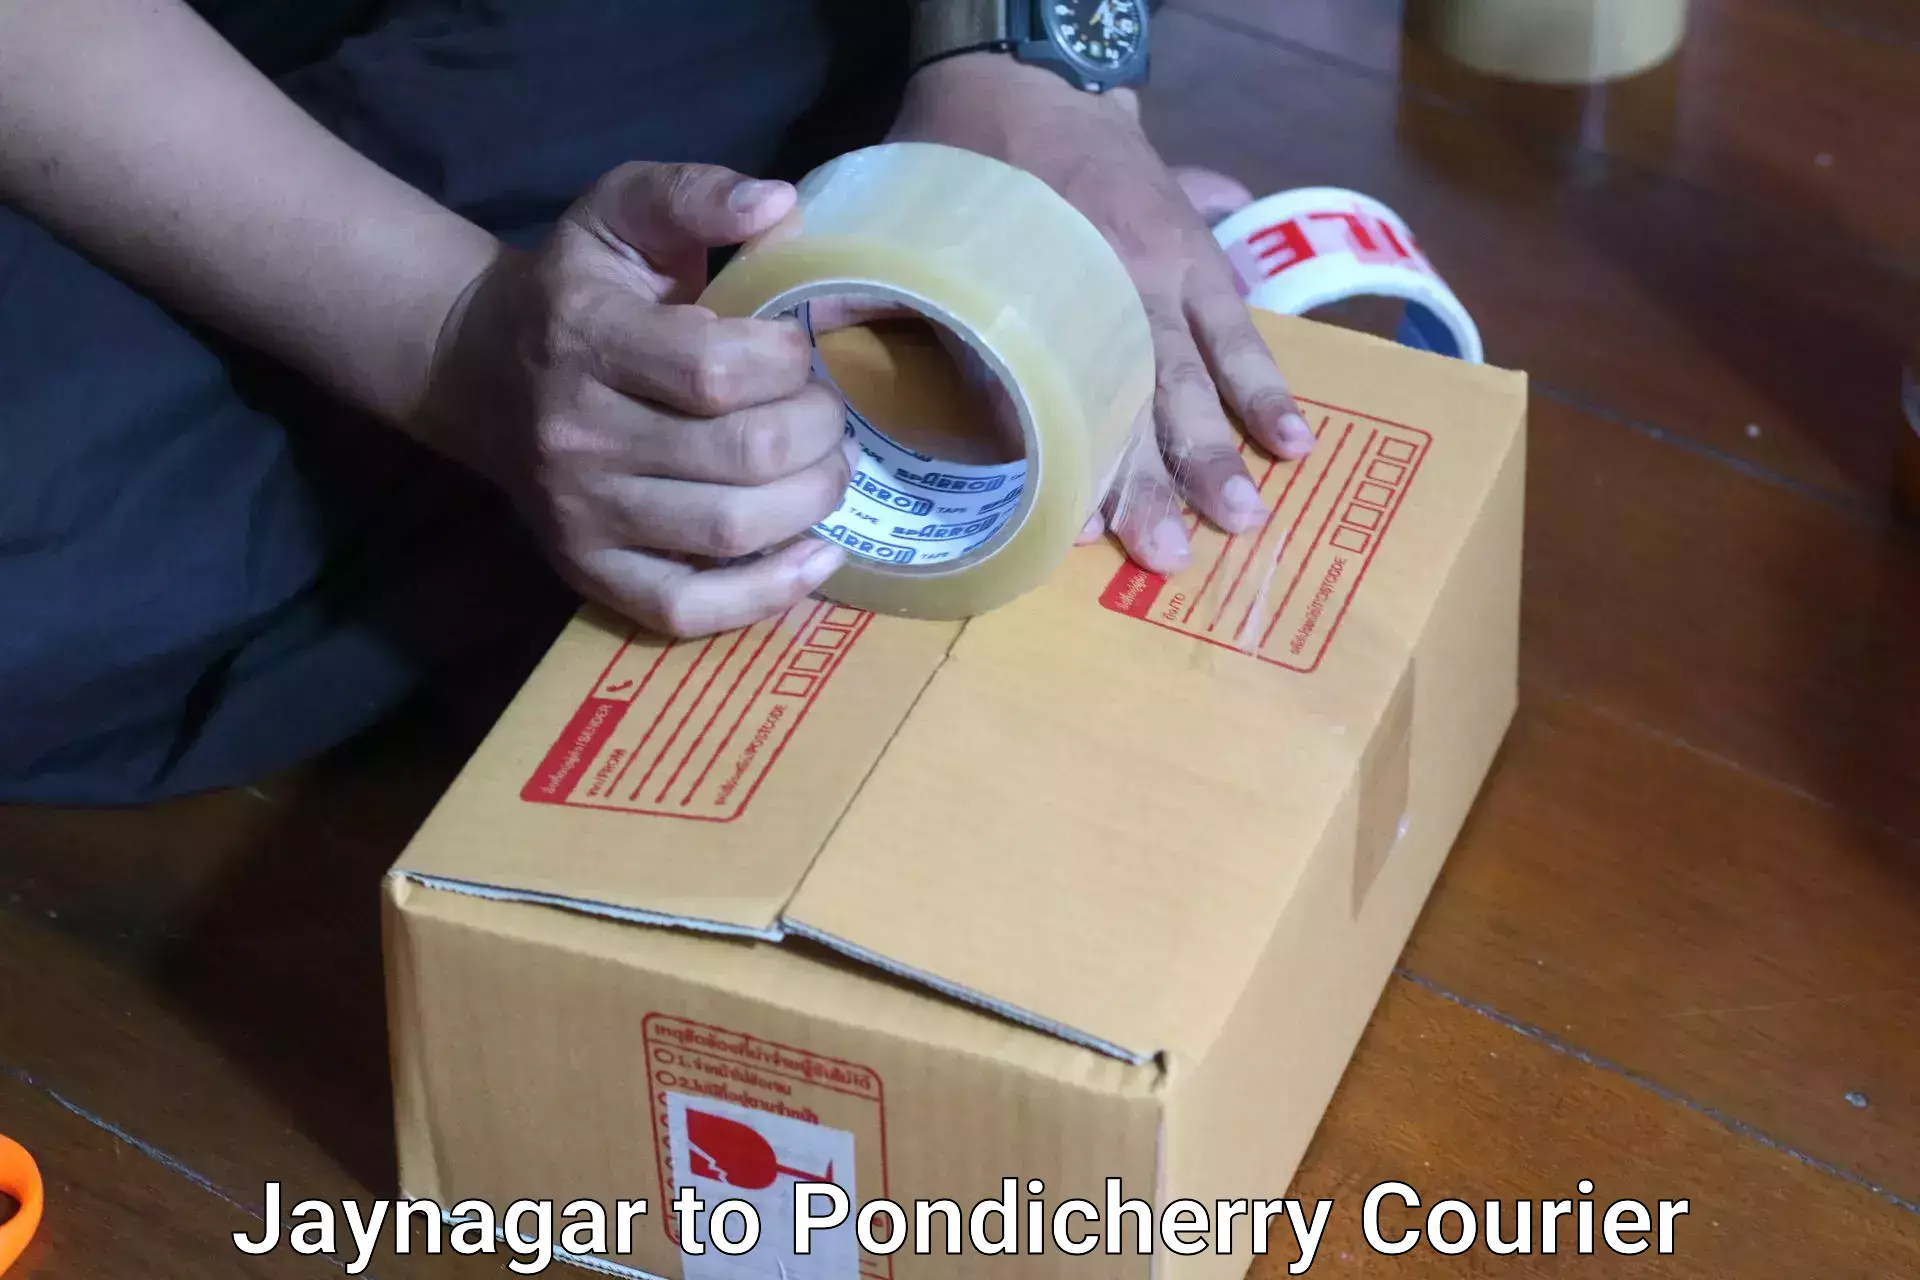 Personal effects shipping in Jaynagar to Pondicherry